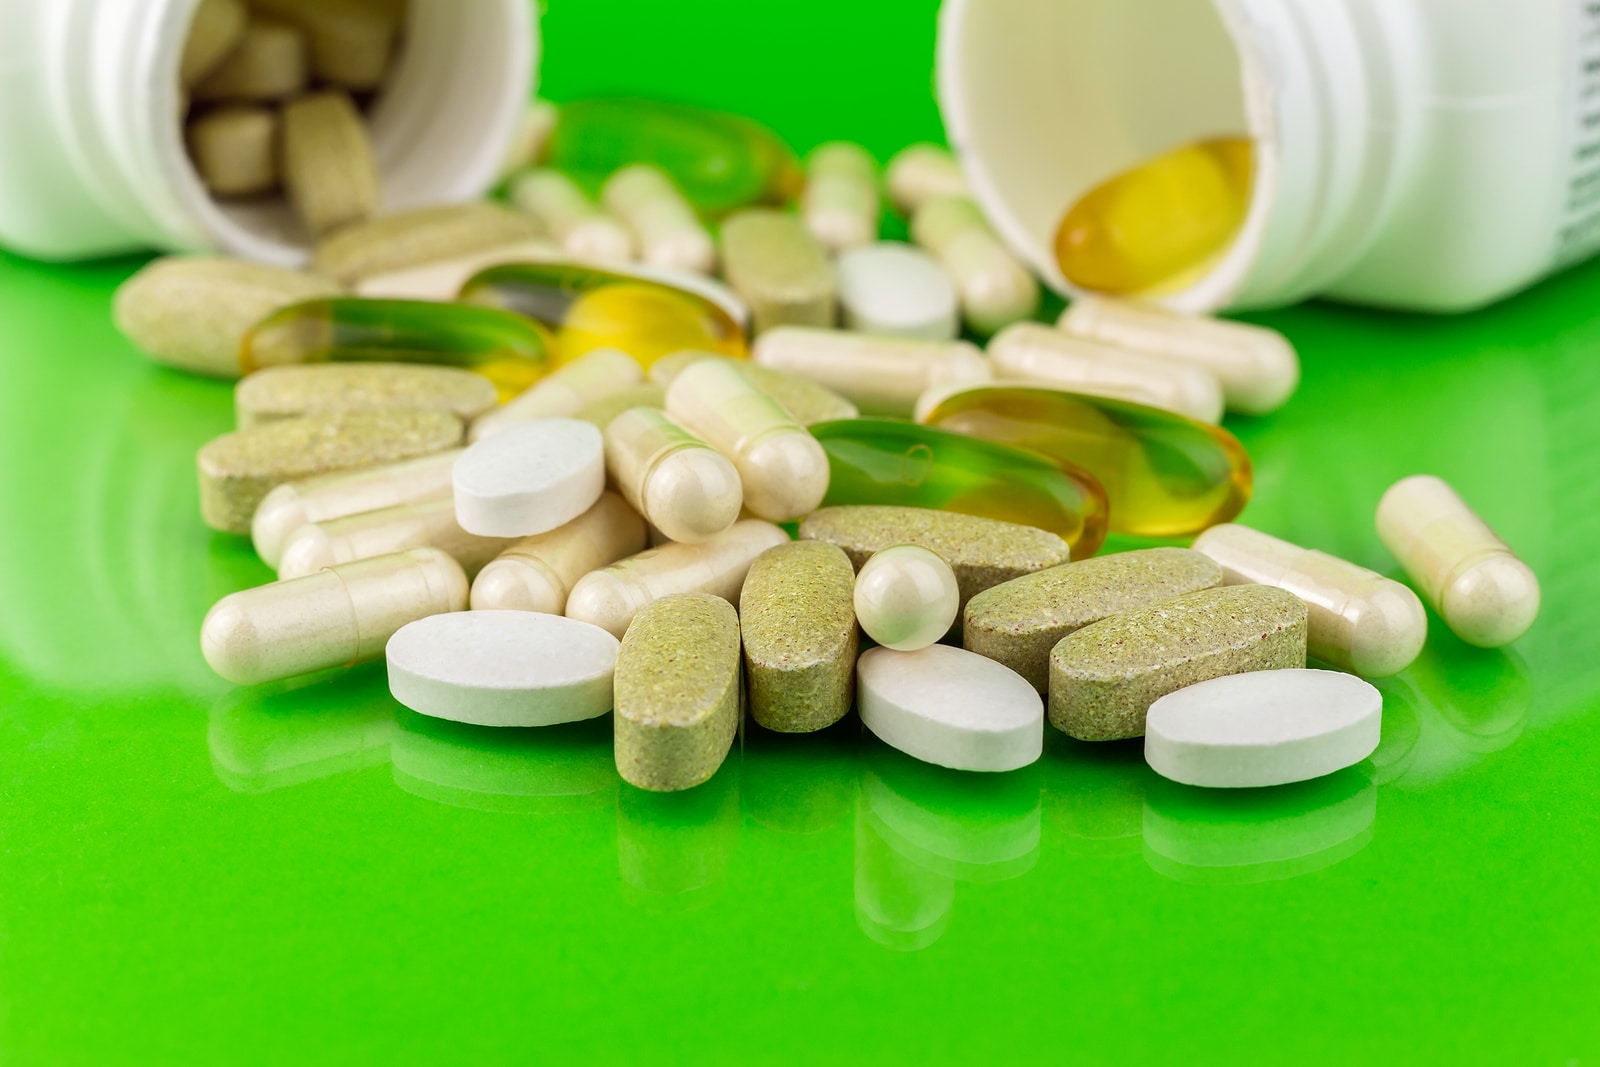 How to Choose a Multivitamin - an Expert's Guide